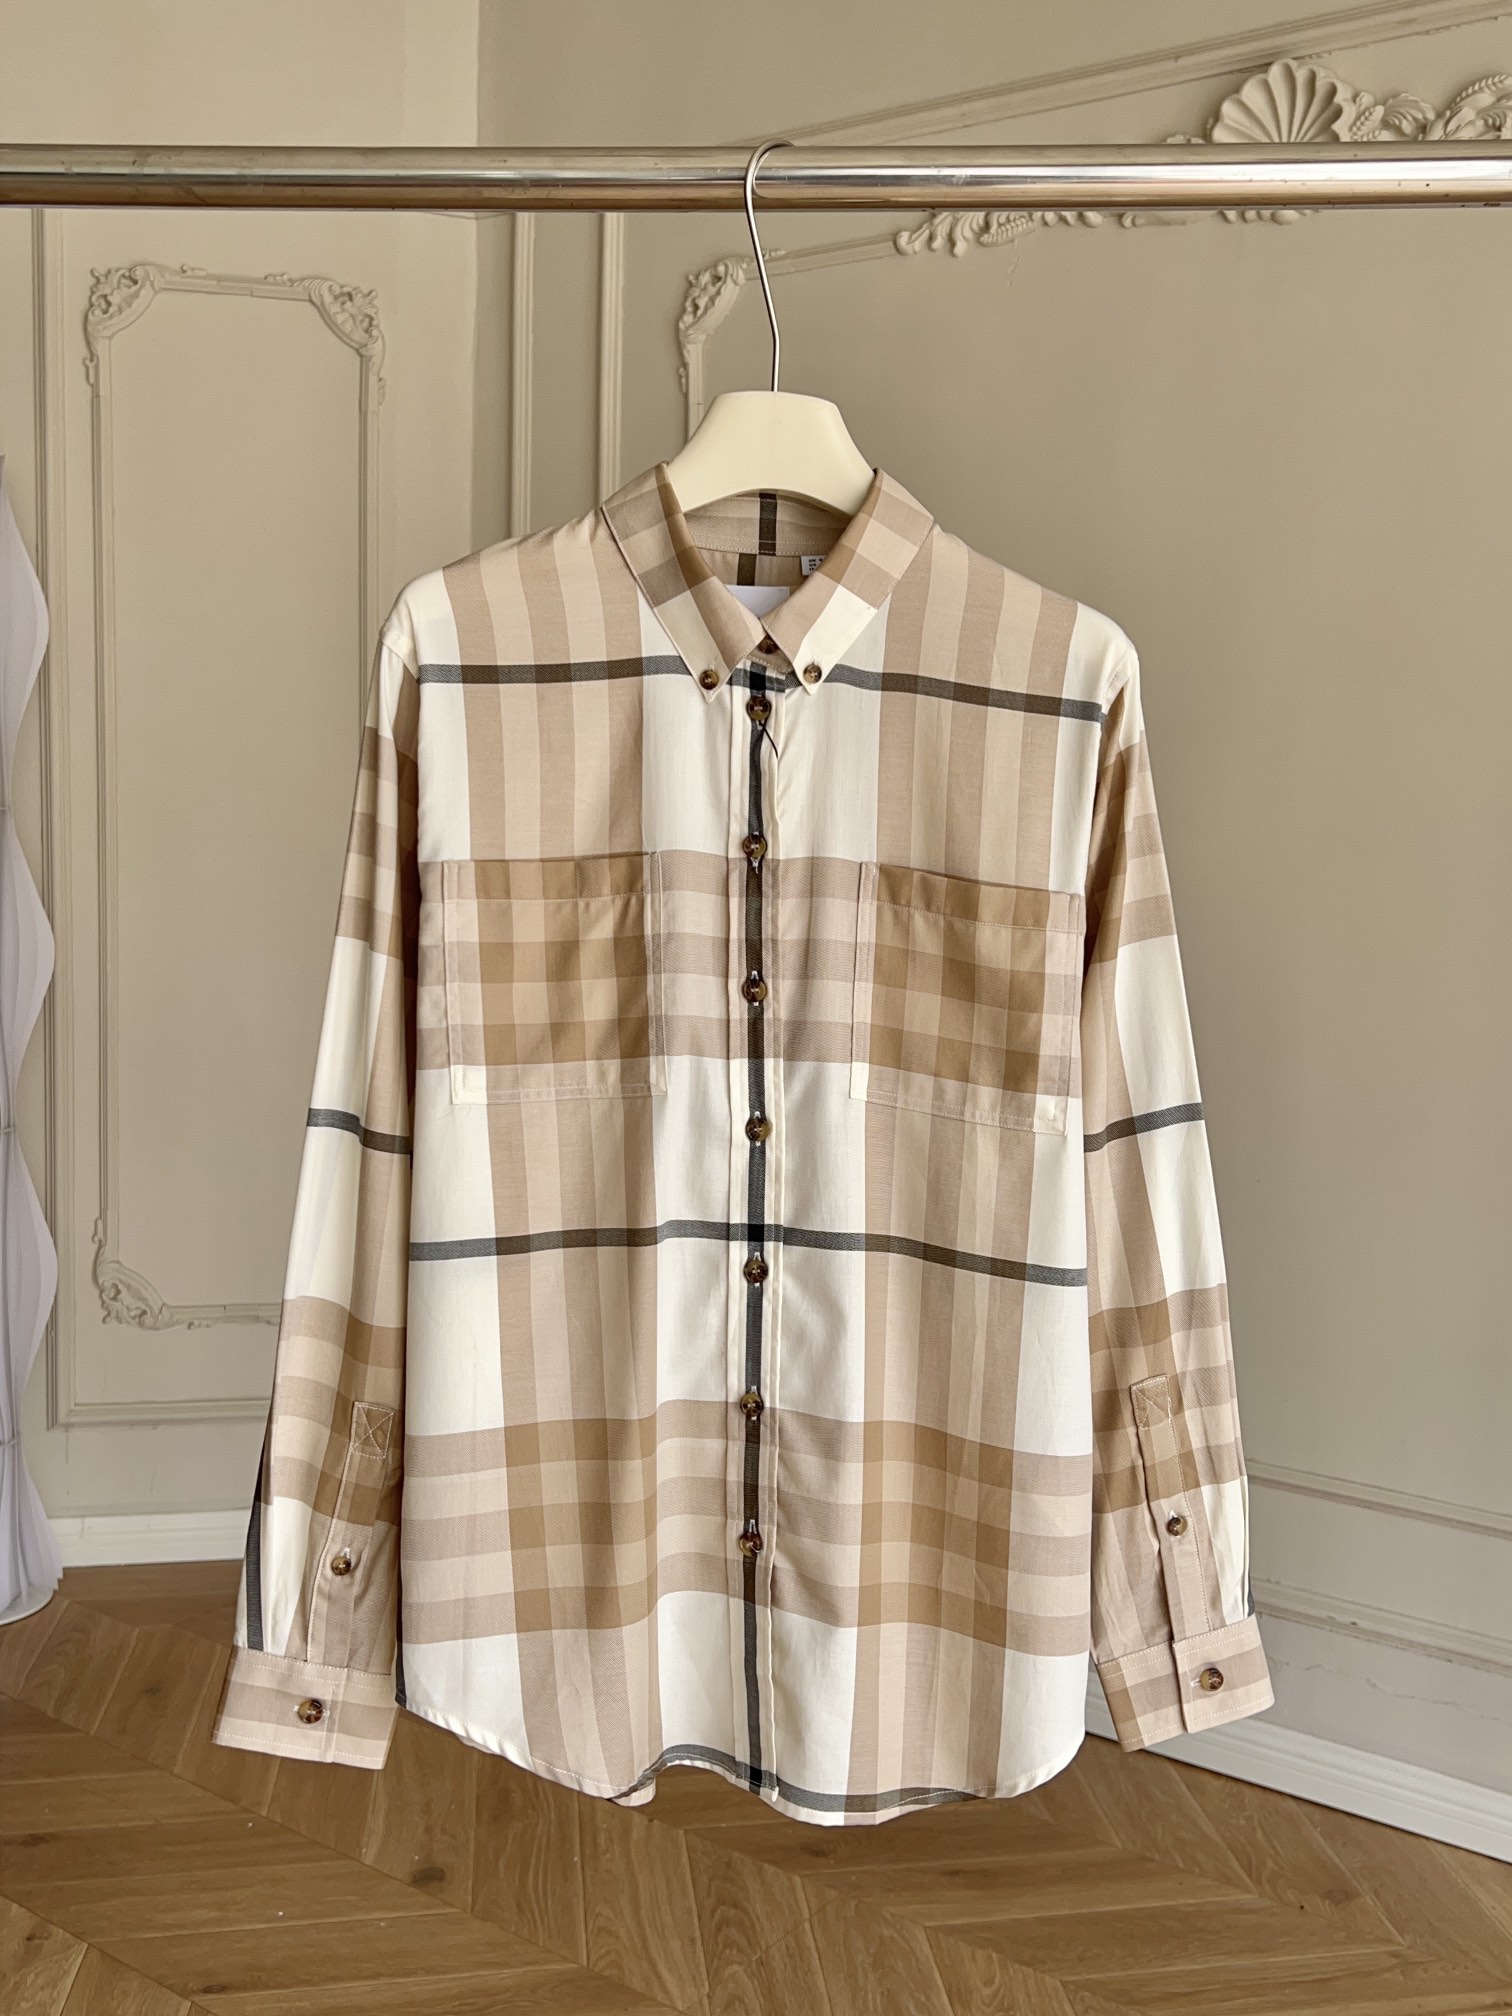 Burberry Clothing Shirts & Blouses New Designer Replica
 Lattice Cotton Spring Collection Vintage Long Sleeve